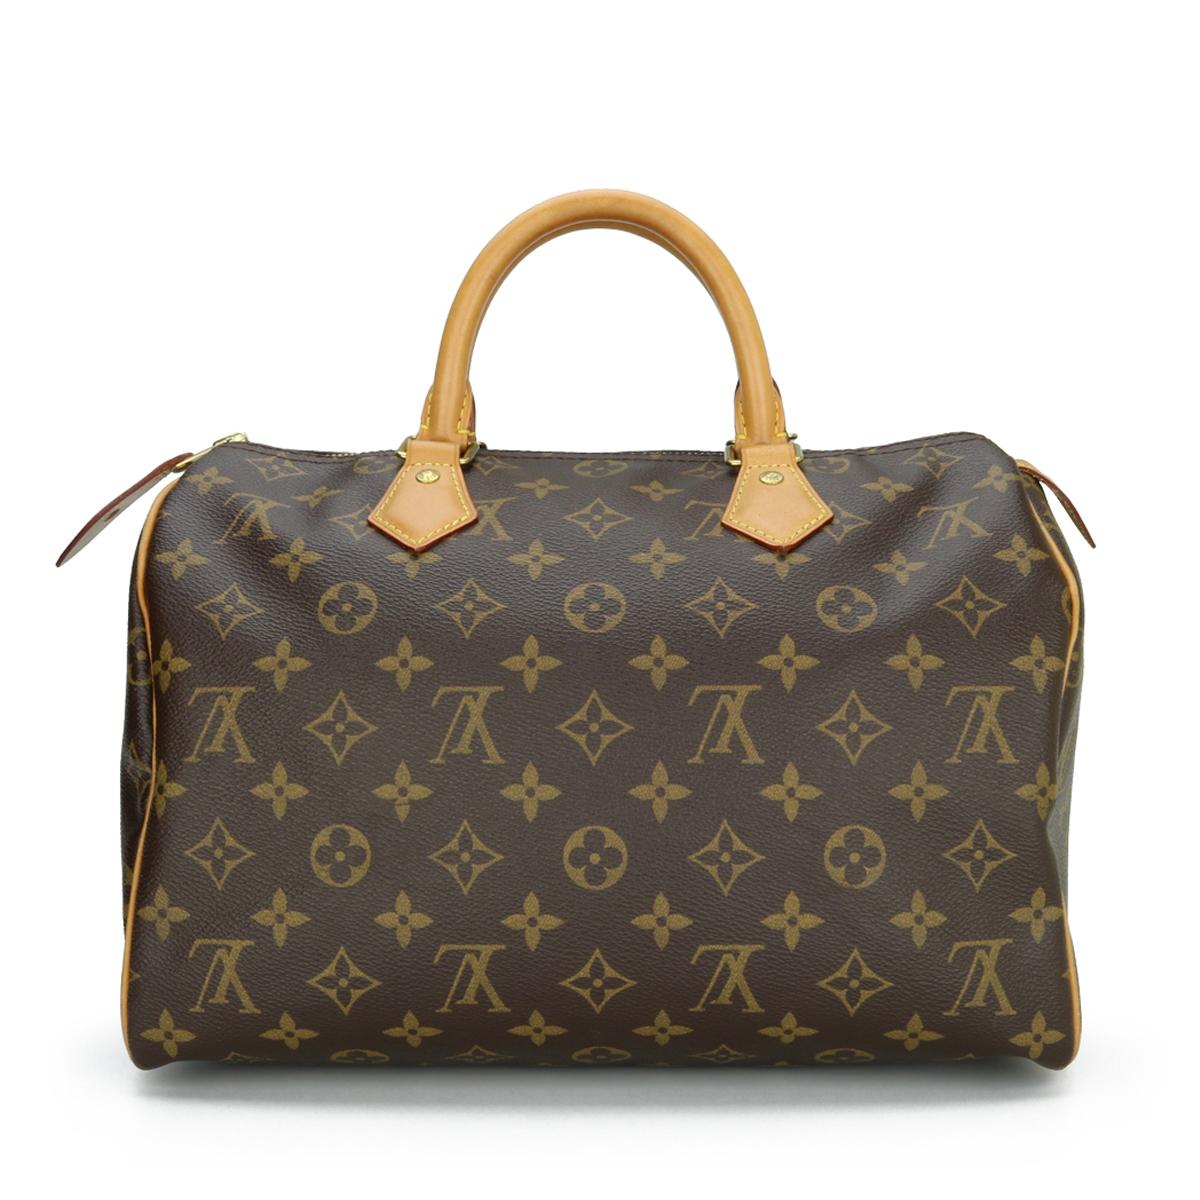 Louis Vuitton Speedy 30 in Monogram 2015.

This bag is in very good condition. 

- Exterior Condition: Very good condition. Light storage creasing to the canvas. Light leather surface rubbing to four base corners. General leather wear and marks